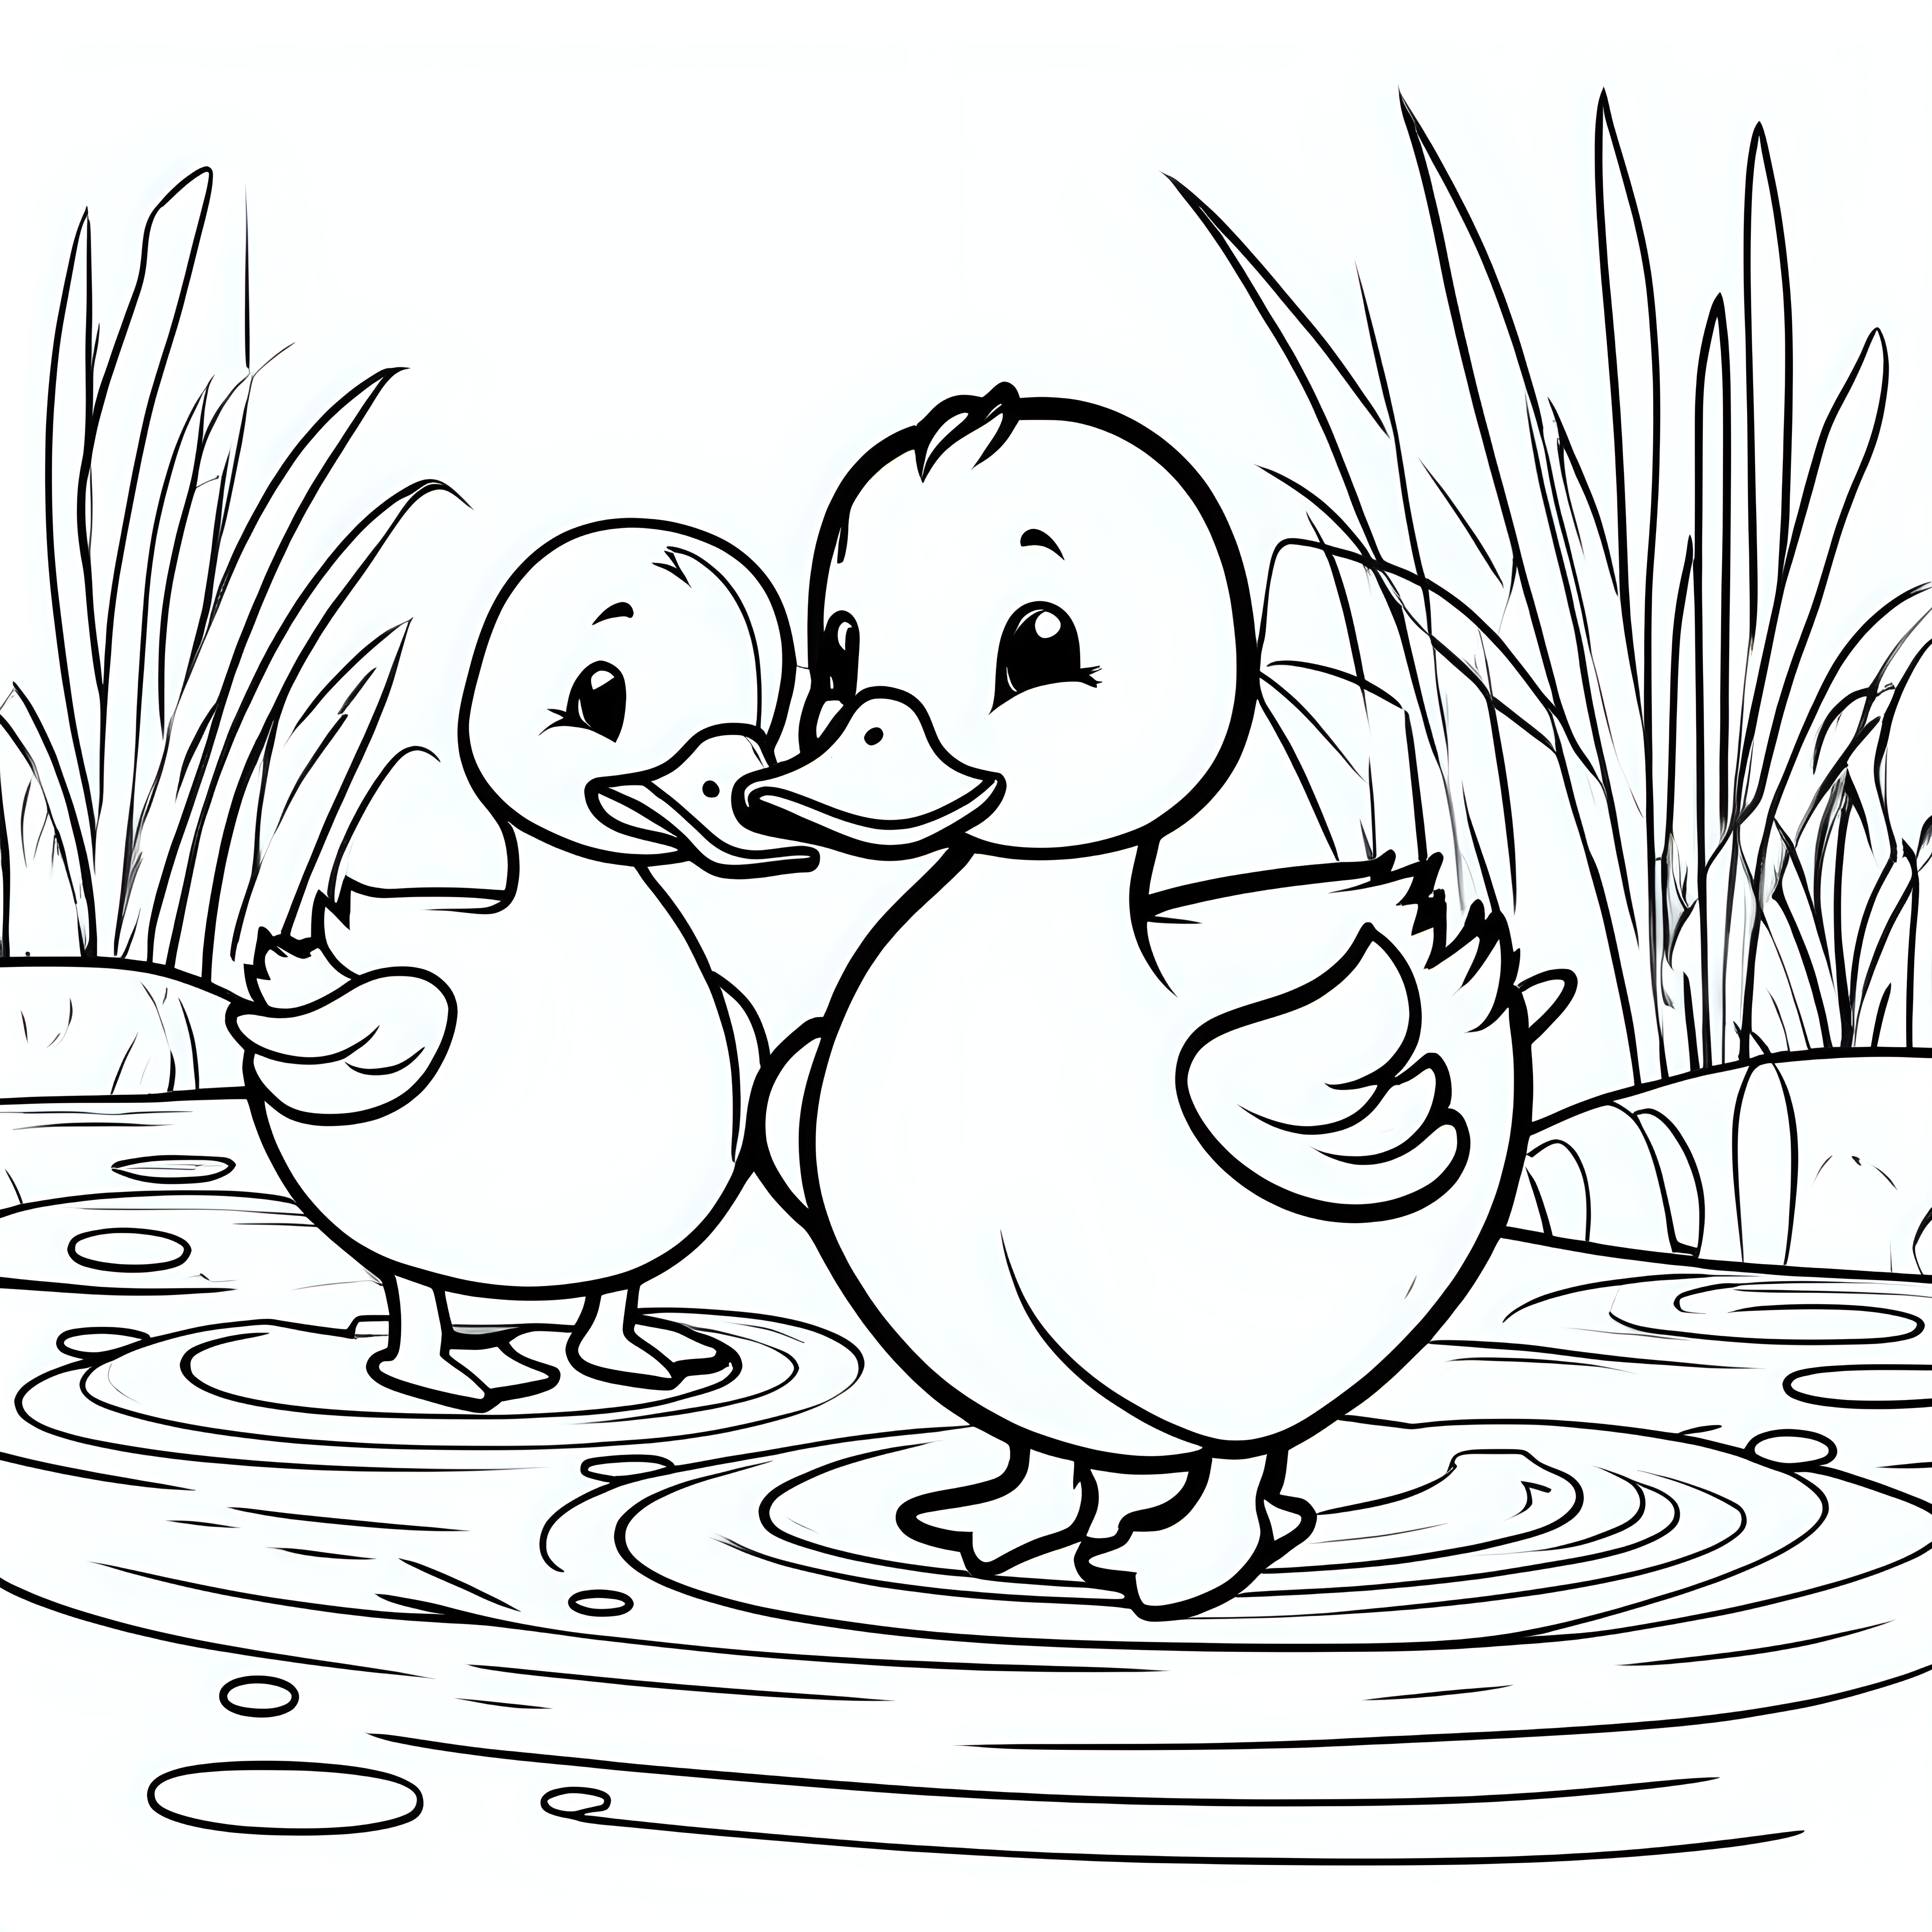 draw a cute ducks with only the outline